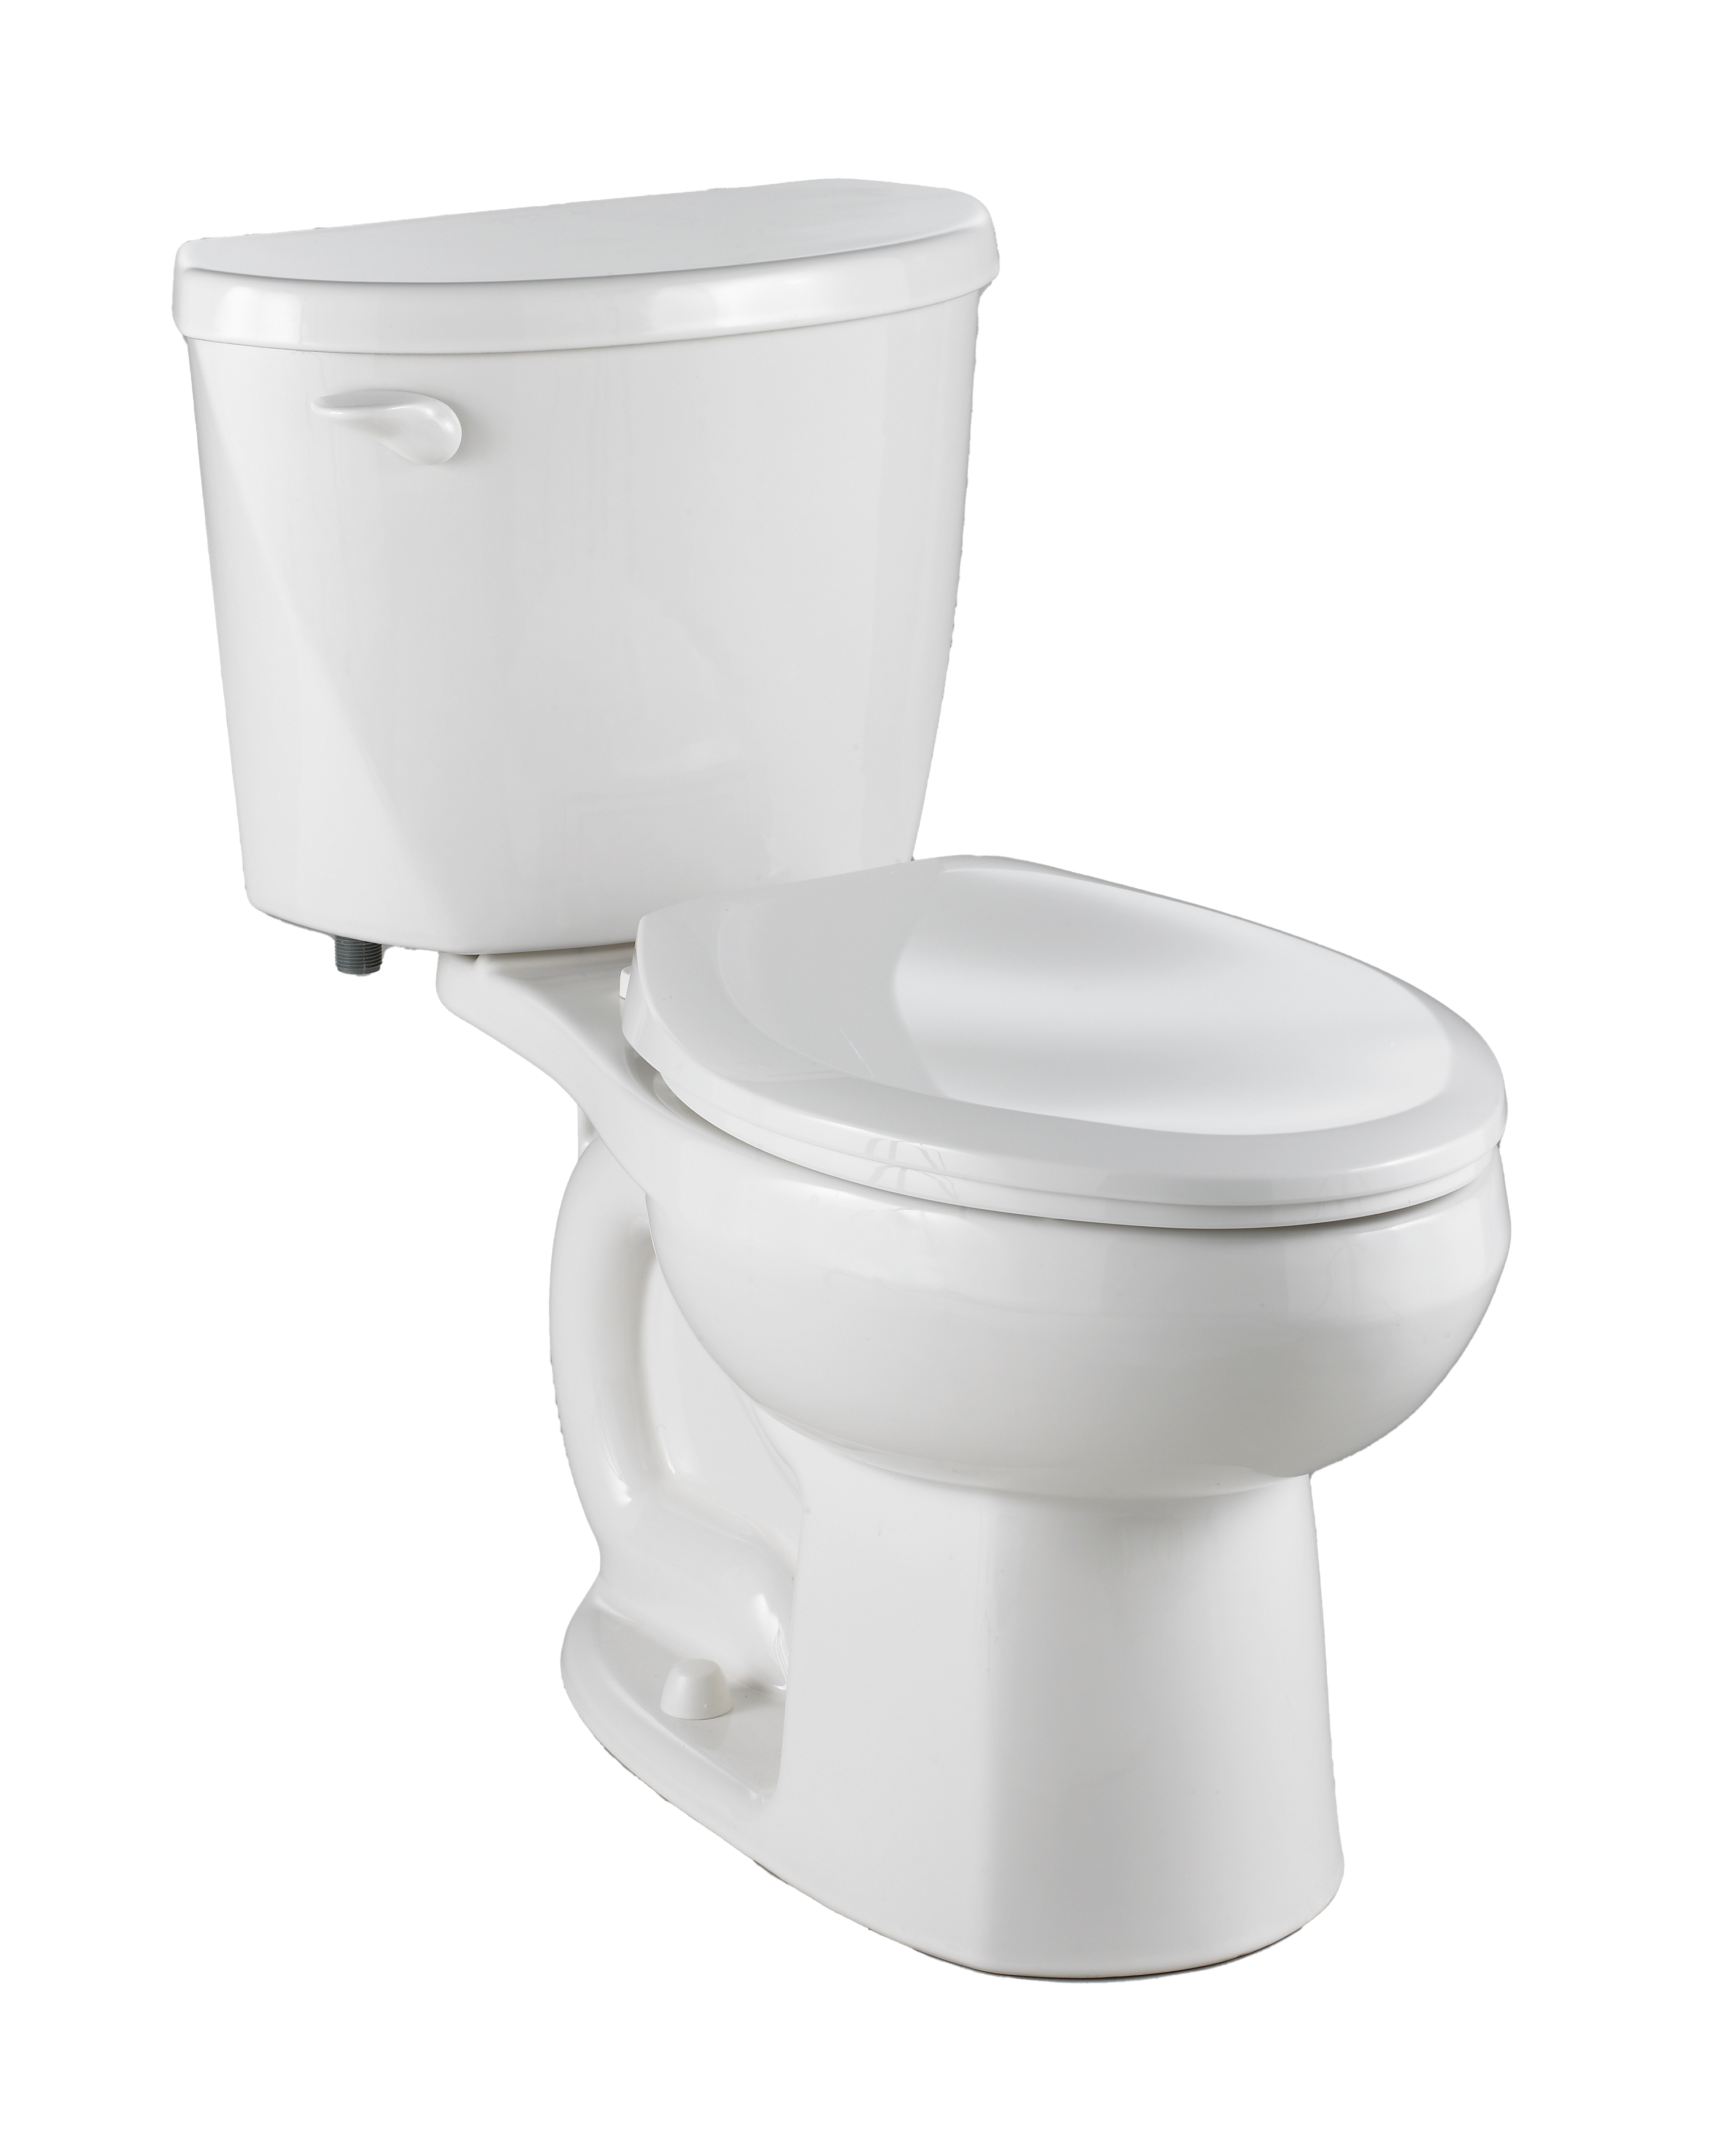 Evolution 2 Two-Piece 1.28 gpf/4.8 Lpf Chair Height Elongated Toilet Less Seat with Lined Tank